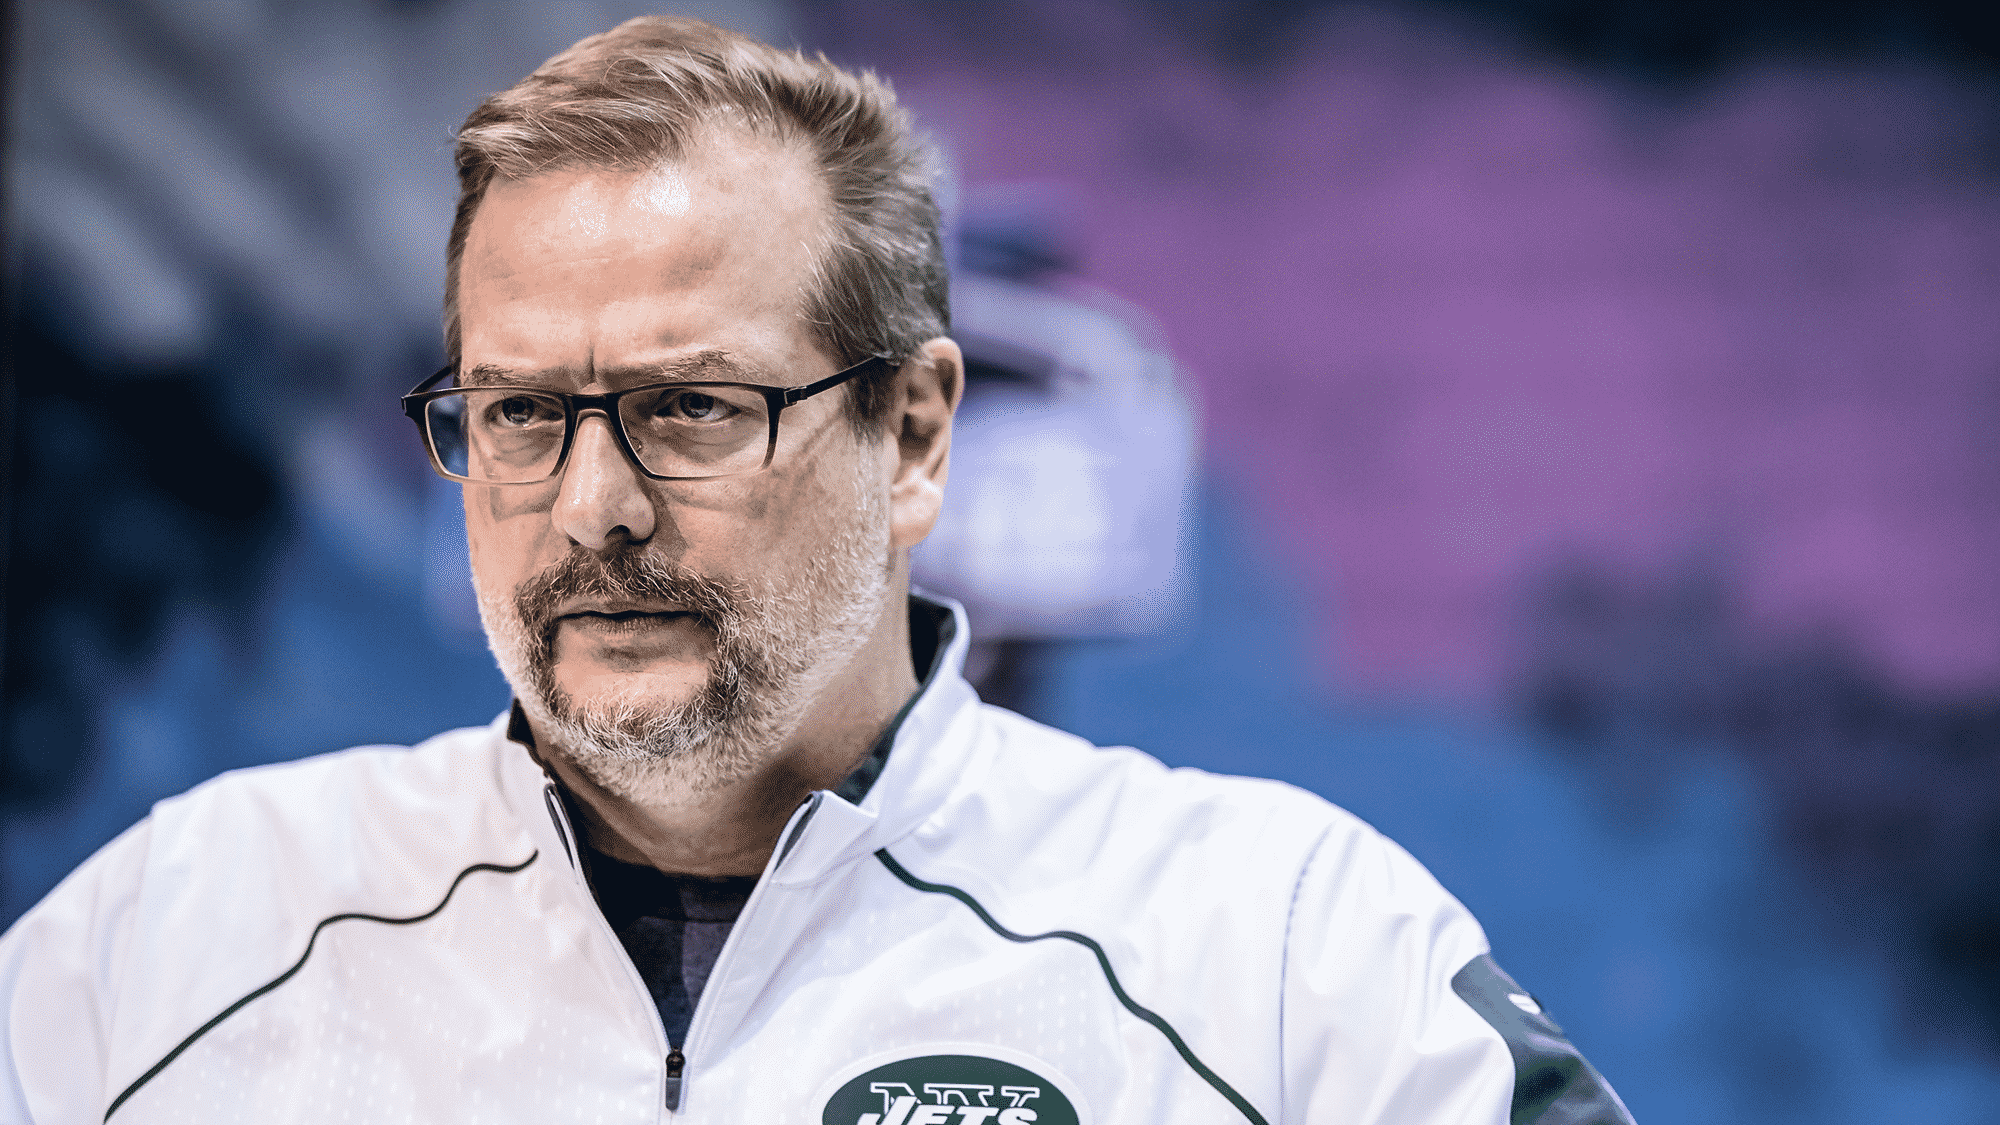 Mike Maccagnan